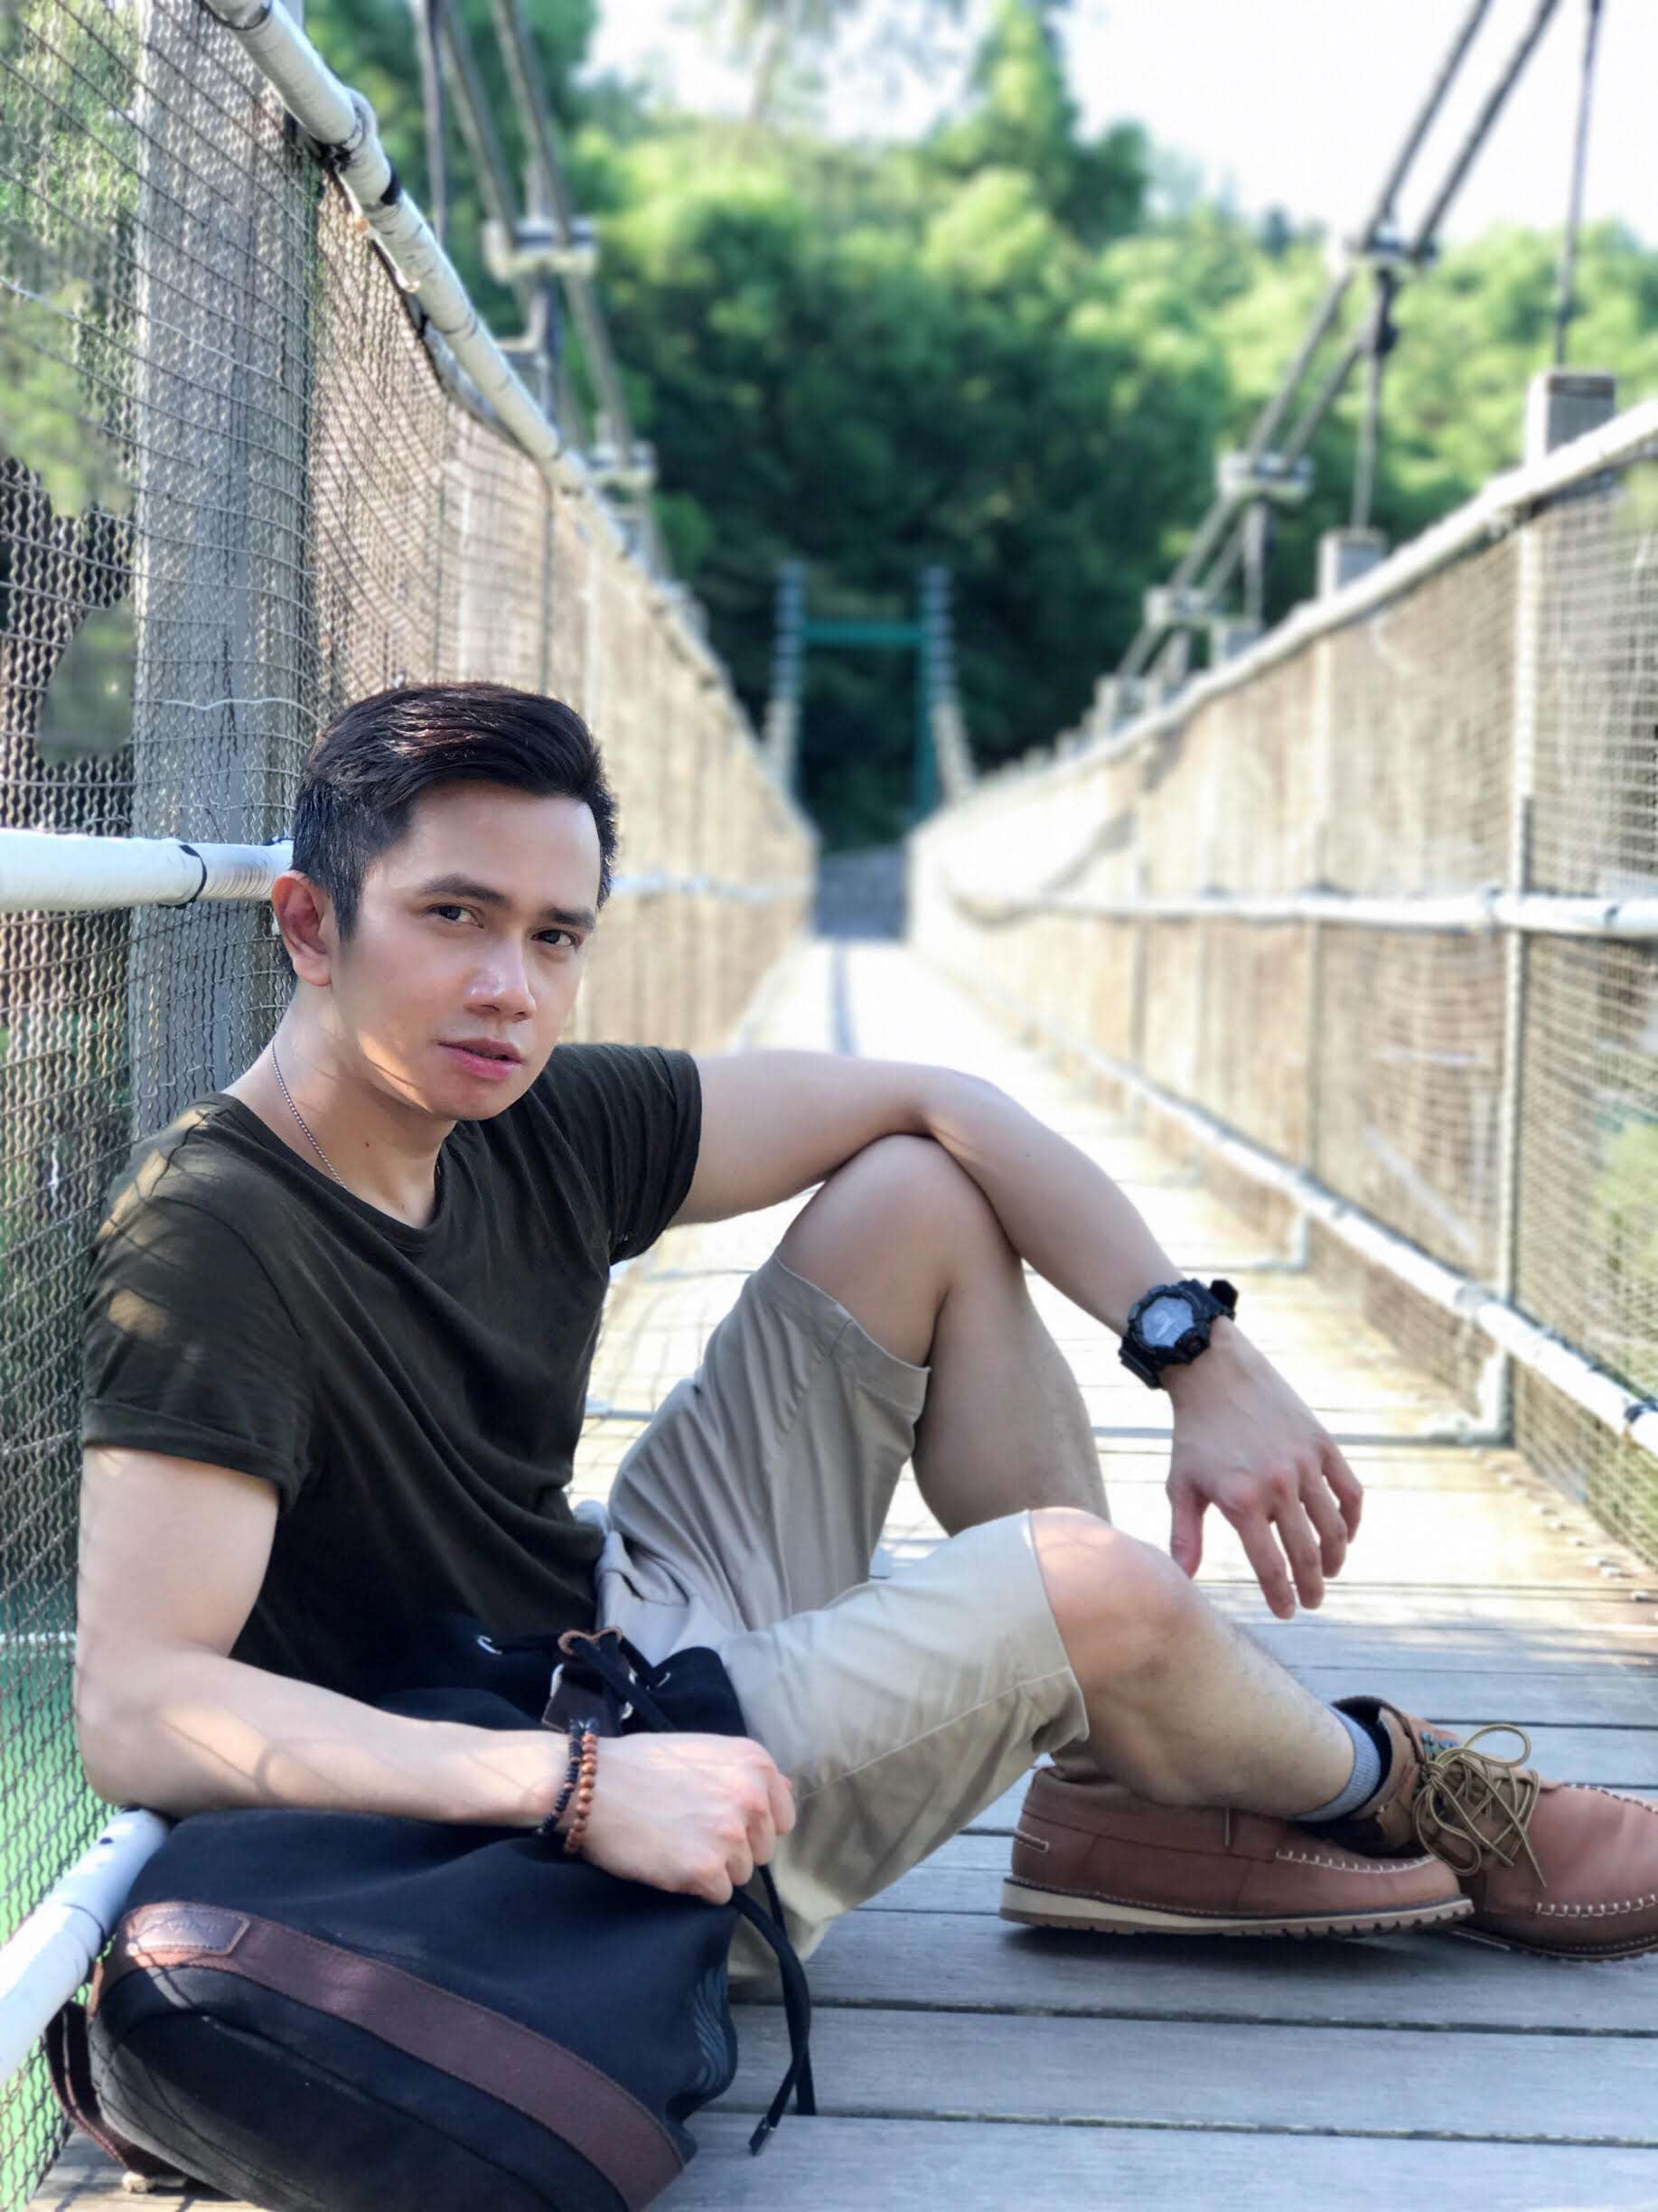 Louis Quizon poses outside in Macau wearing an olive t-shirt, tan shorts, and light brown shoes.